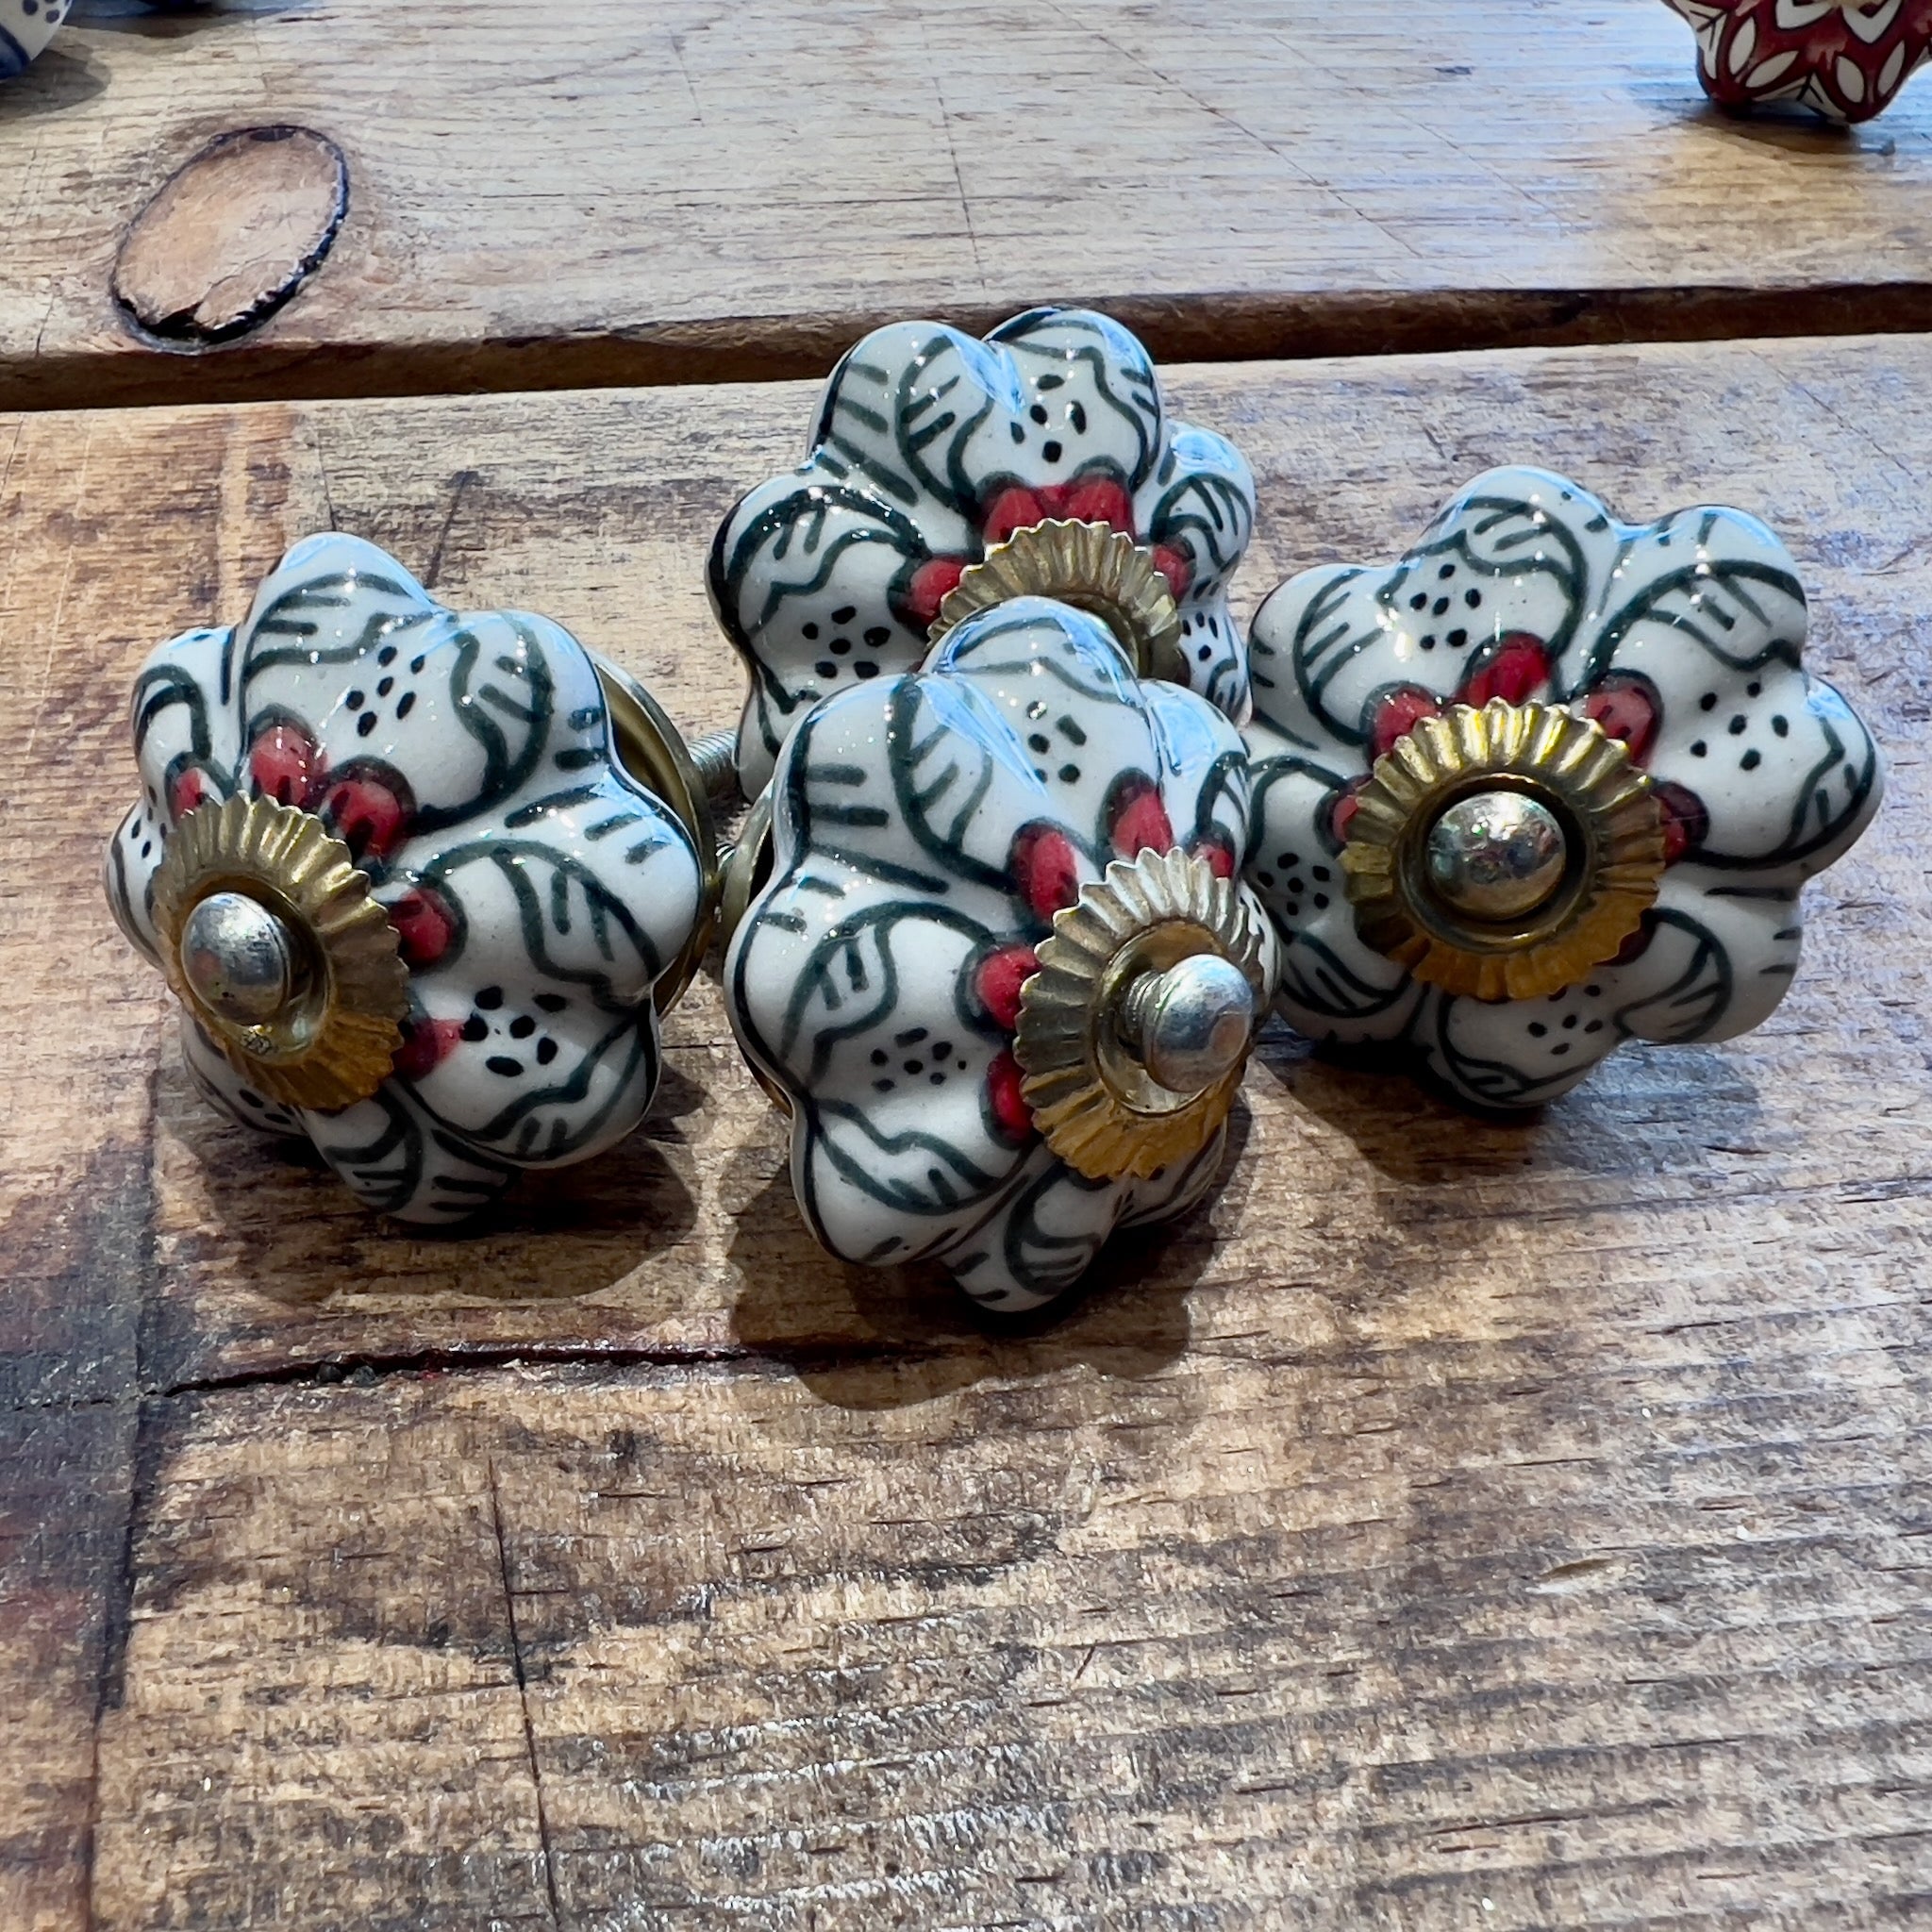 Blue Pottery Drawer Knobs (Newly Added)